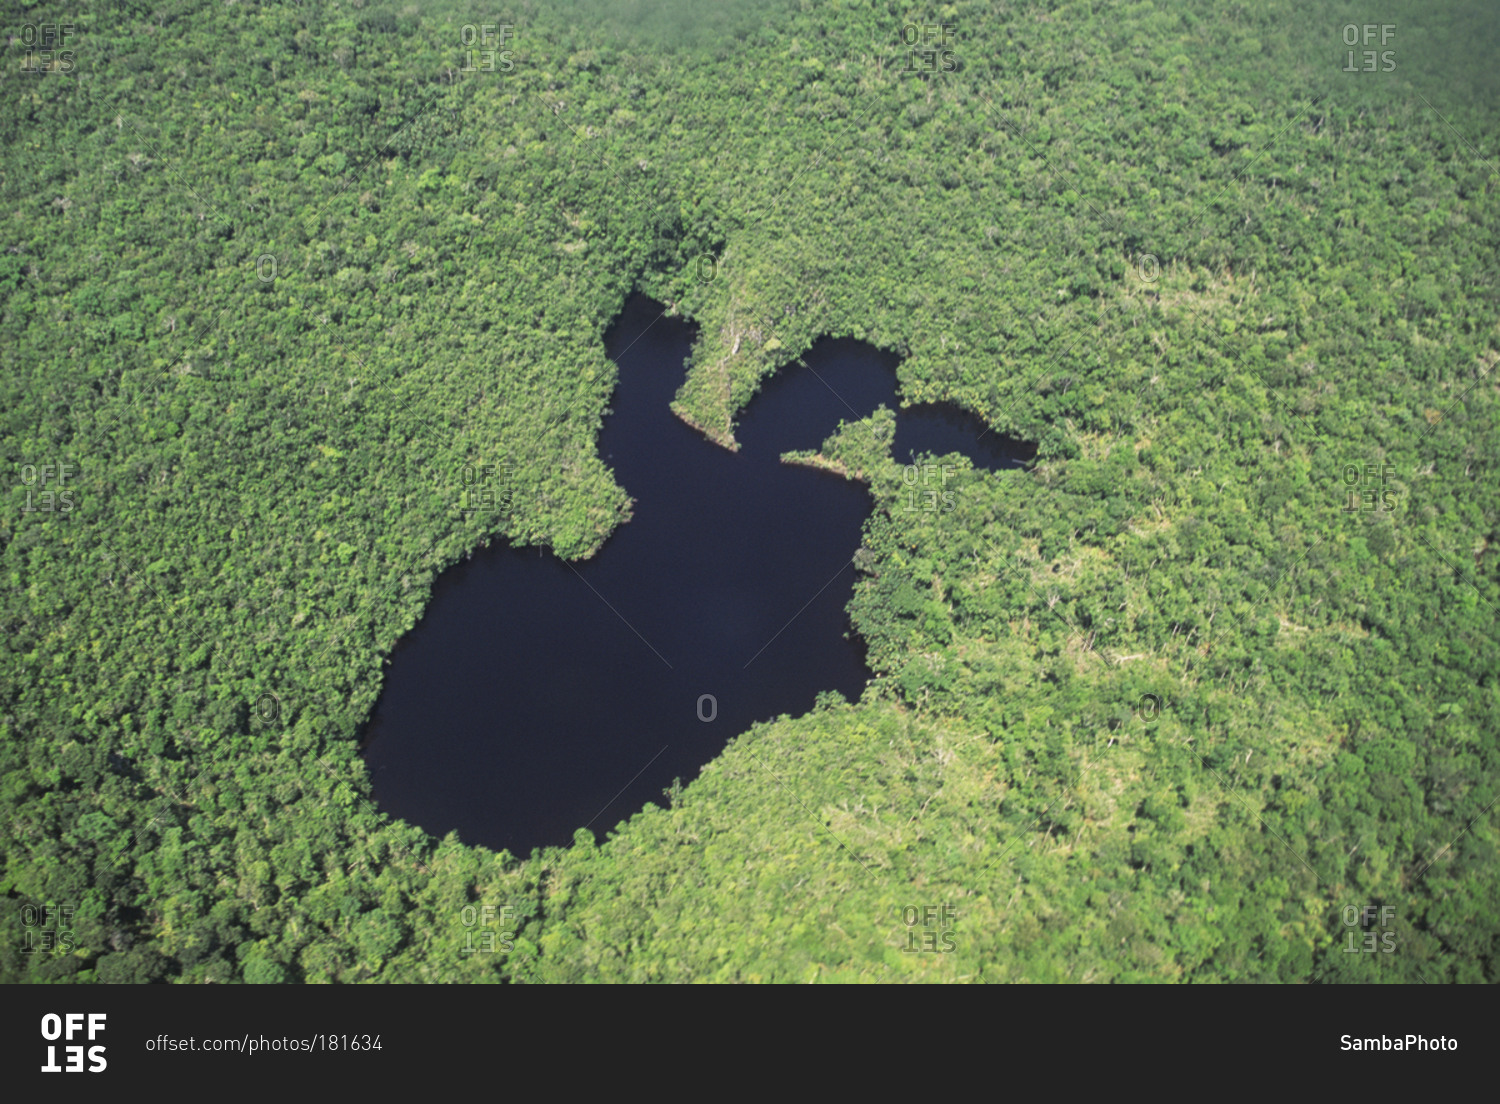 Lake in the middle of jungle seen from above